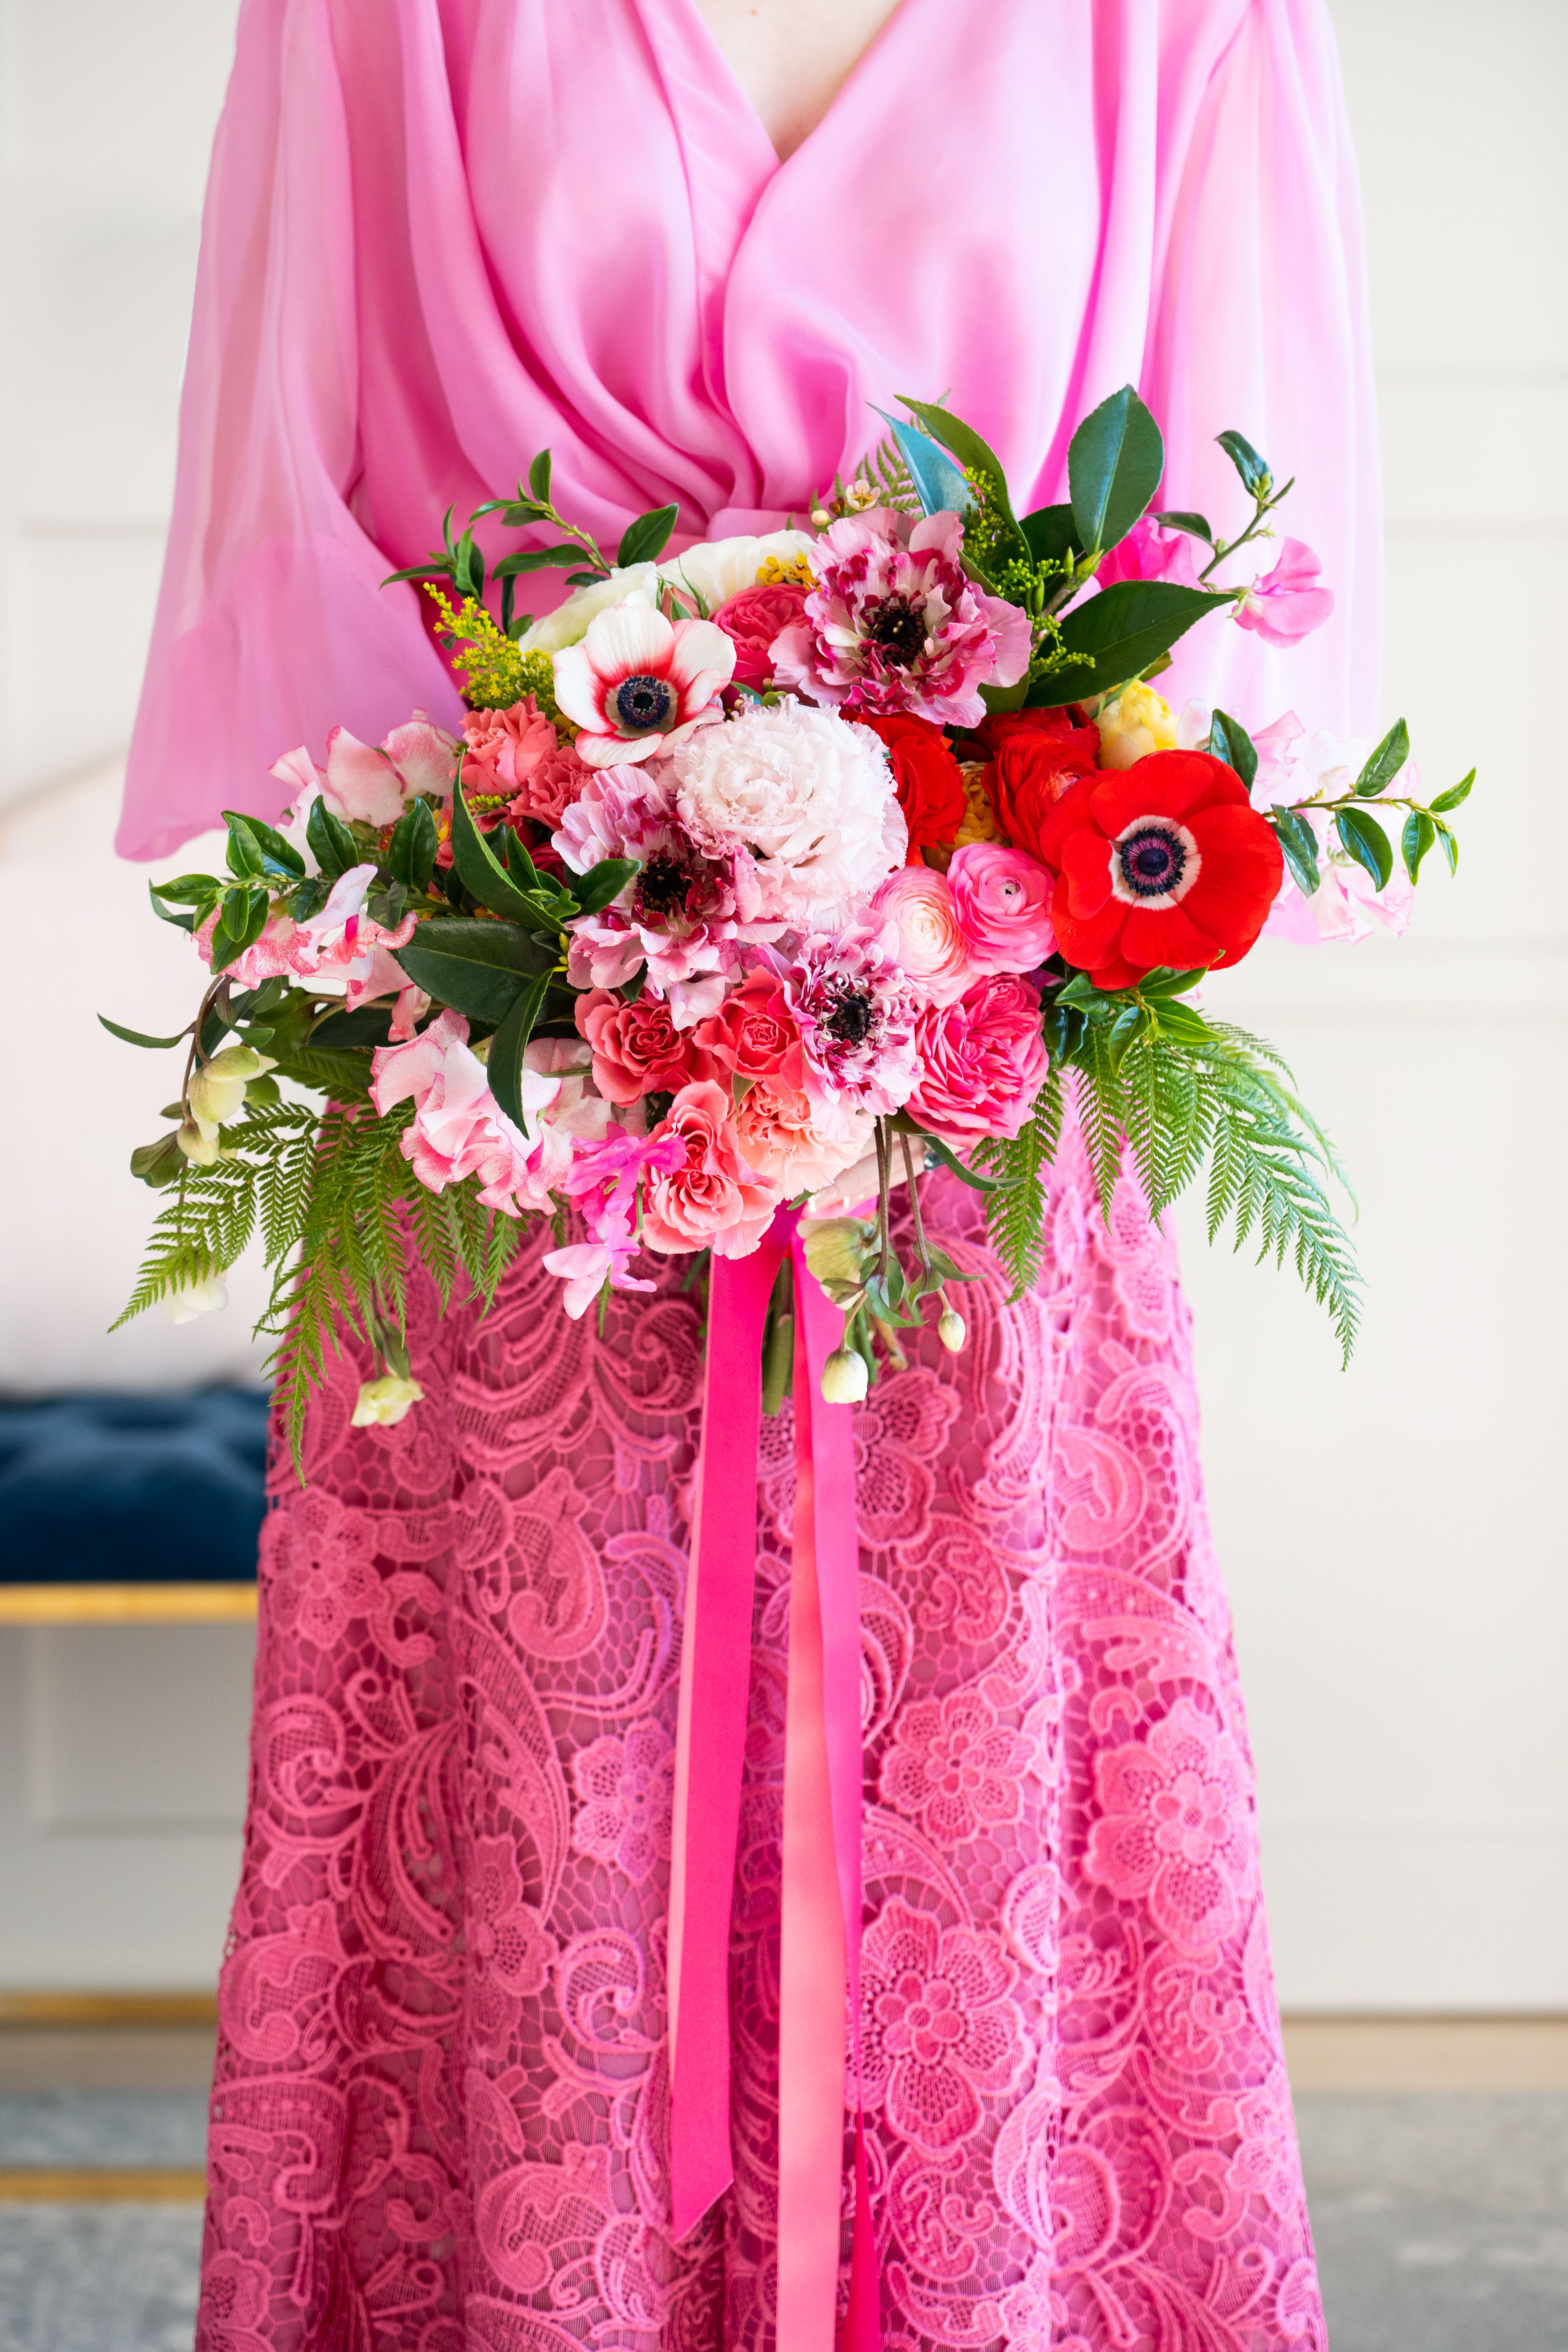 Our bride in a vibrant pink lace wedding dress, holding her lush bridal bouquet full of bright ranunculus and anemones.